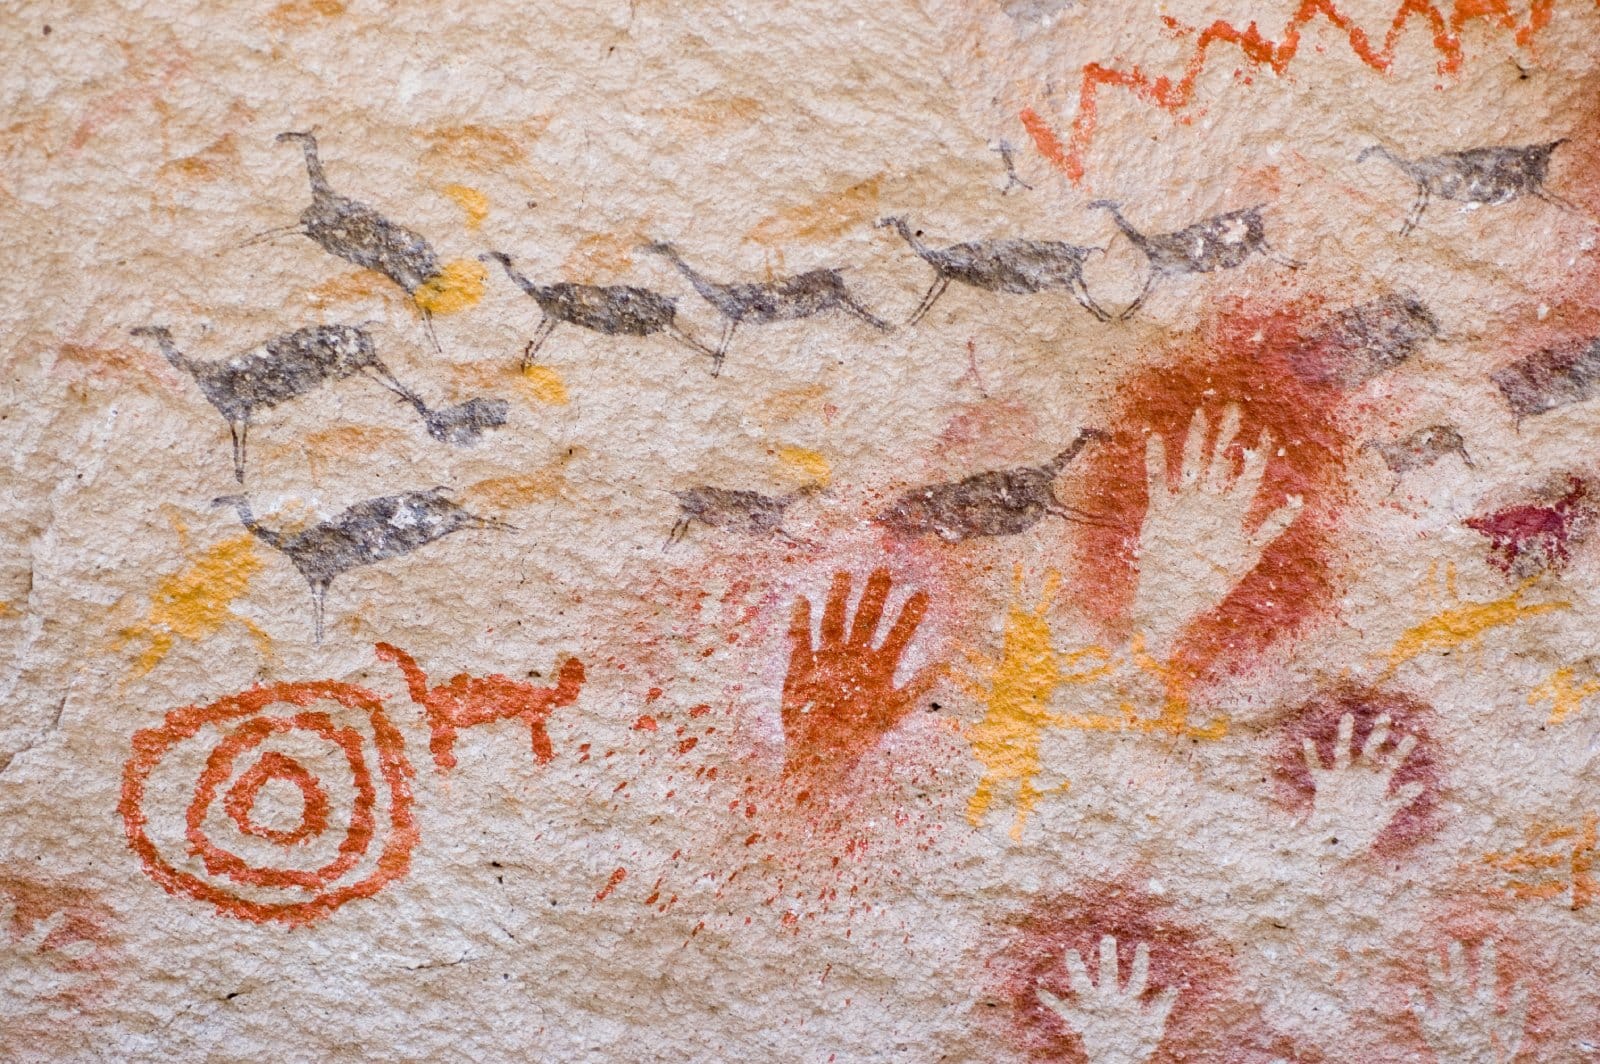 <p class="wp-caption-text">Image Credit: Shutterstock / Pablo Caridad</p>  <p>Delve into the depths of Cueva de las Manos in Argentina and uncover ancient rock art dating back over 9,000 years. Navigate through winding passages and marvel at the vibrant handprints and intricate cave paintings left behind by the region’s indigenous peoples.</p>